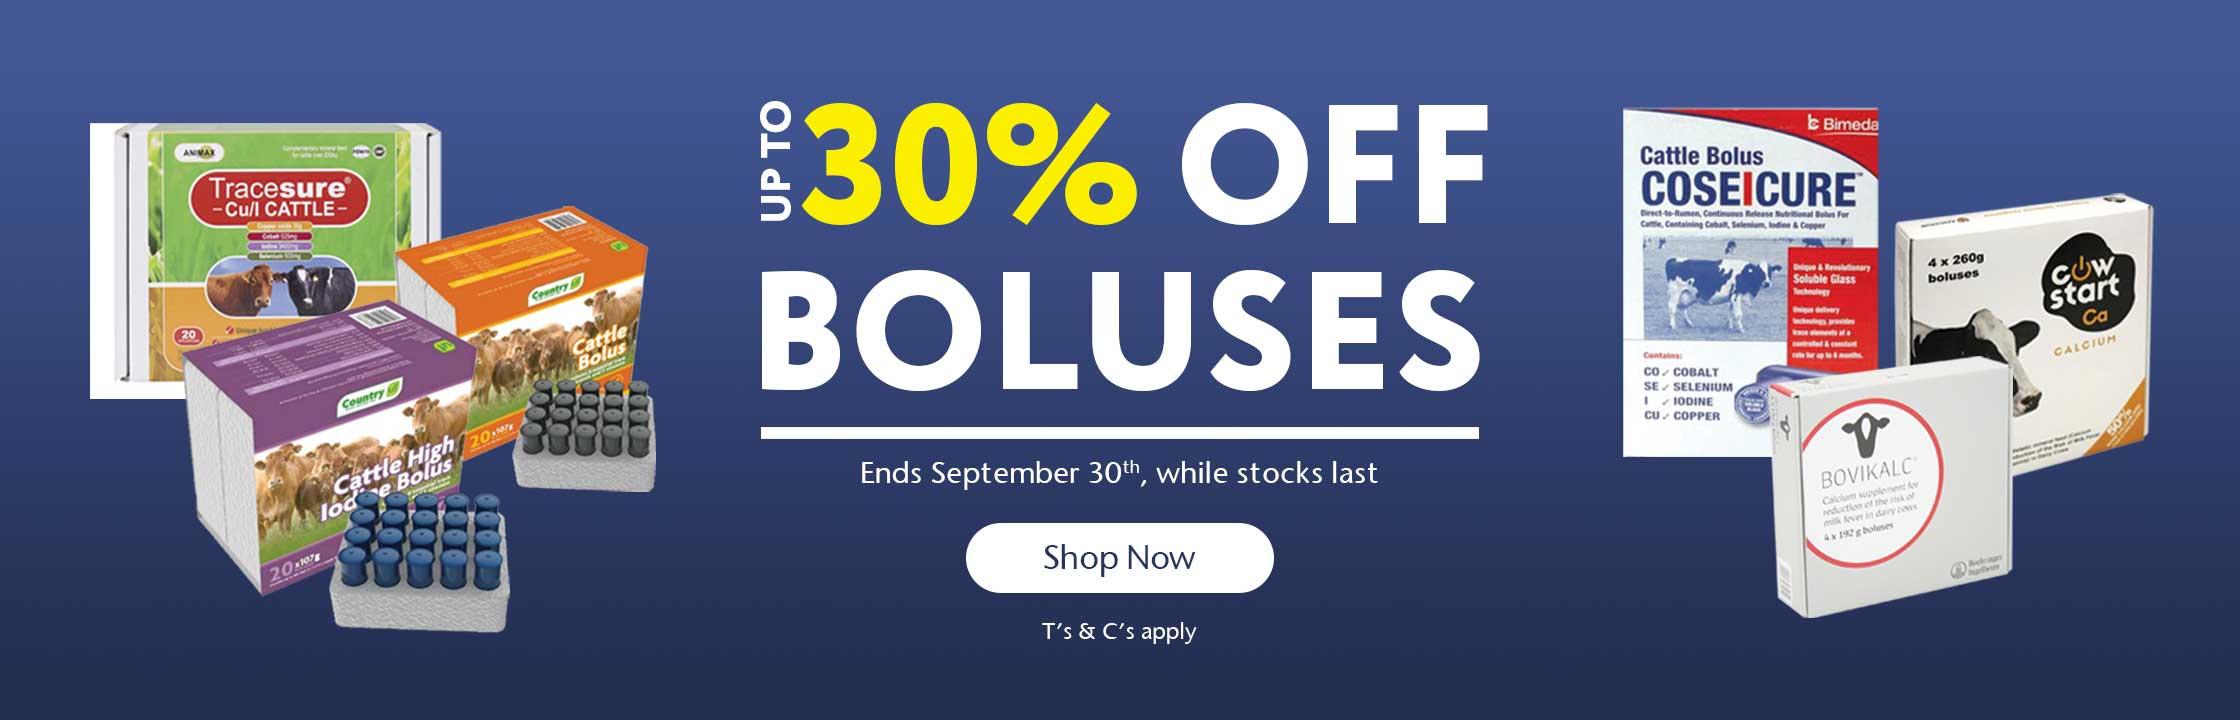 Up to 30% OFF Bolus Offer